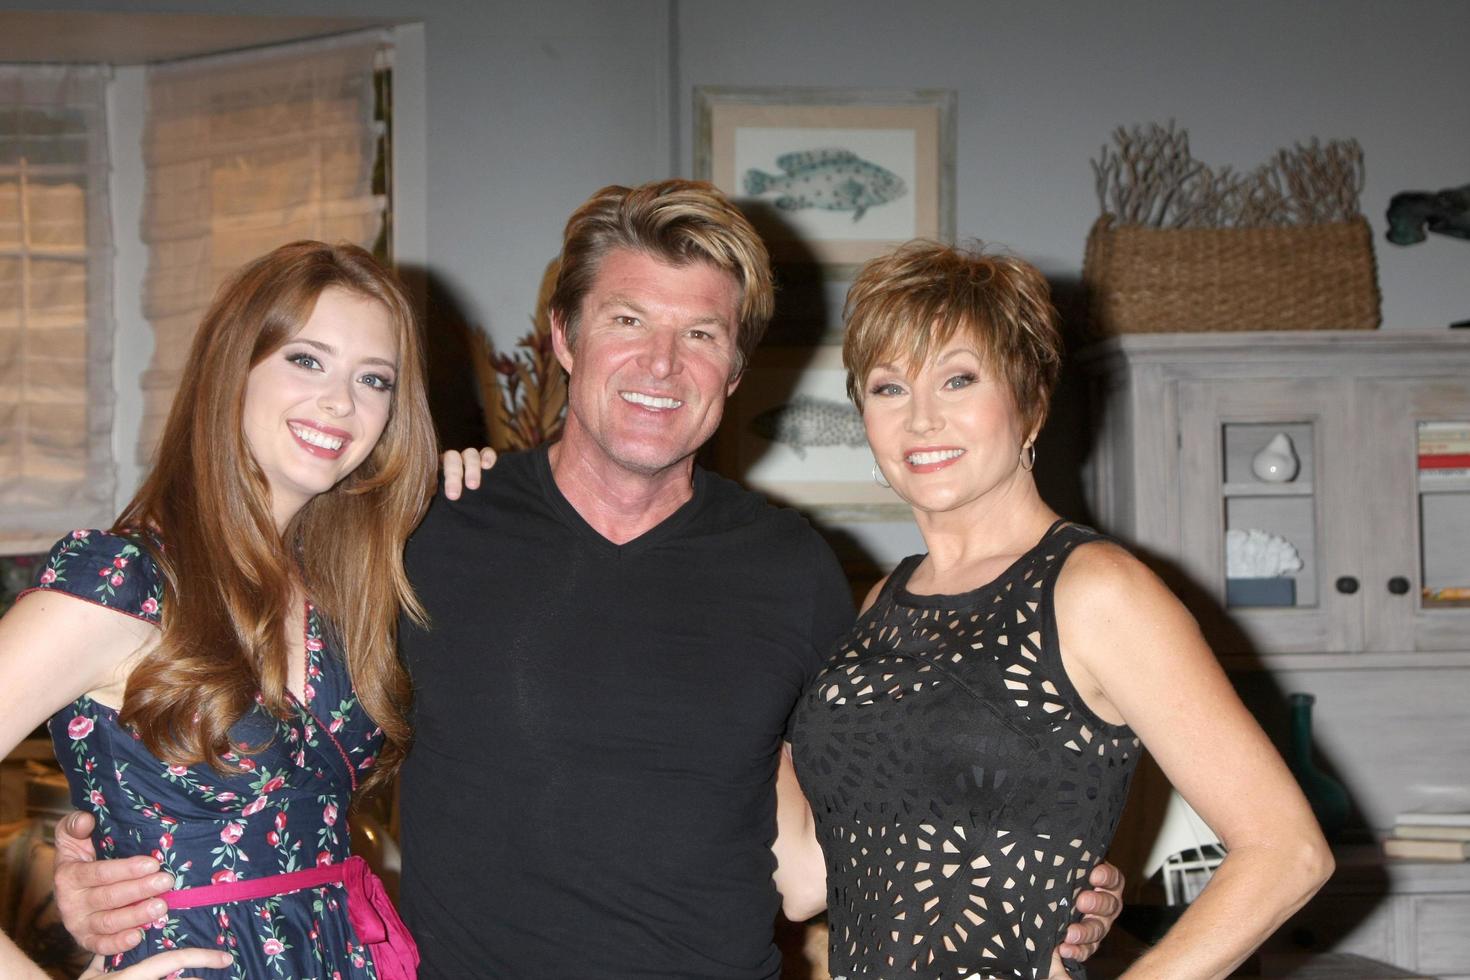 LOS ANGELES, AUG 14 - Ashlyn Pearce, WInsor Harmon, Schae Harrison at the Bold and Beautiful Fan Event Friday at the CBS Television City on August 14, 2015 in Los Angeles, CA photo